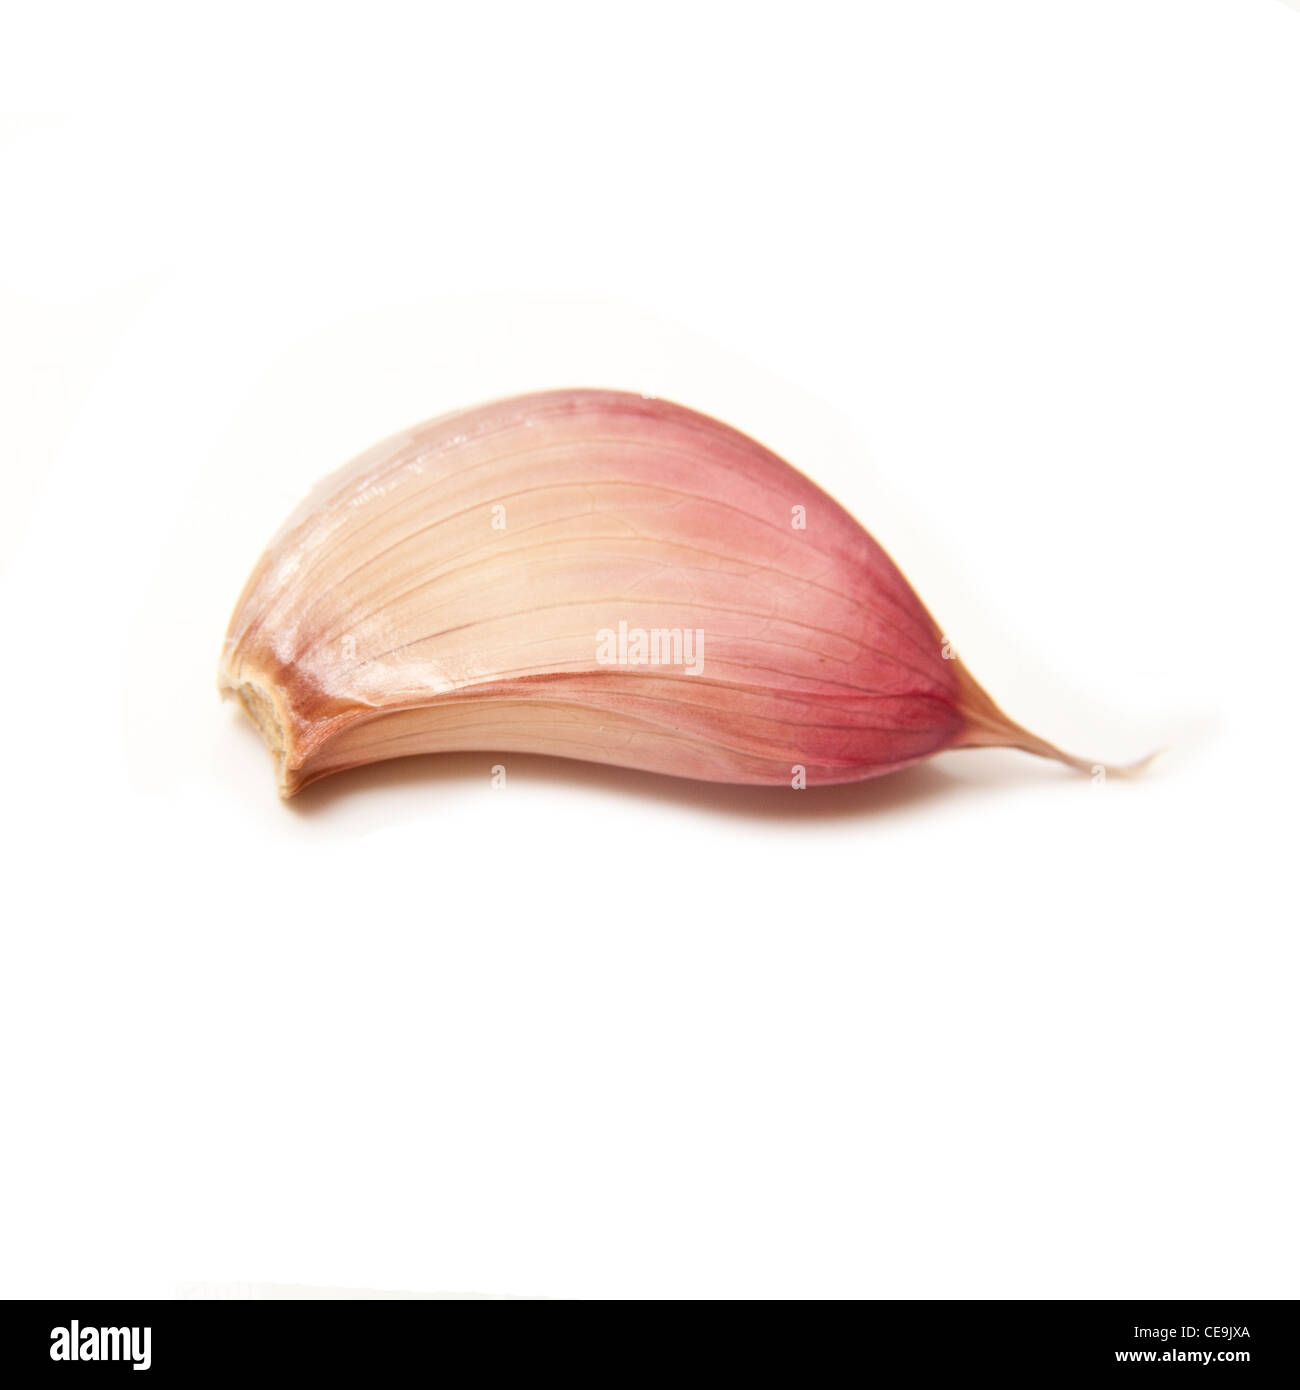 French pink or rose garlic clove isolated on a white studio background. Stock Photo